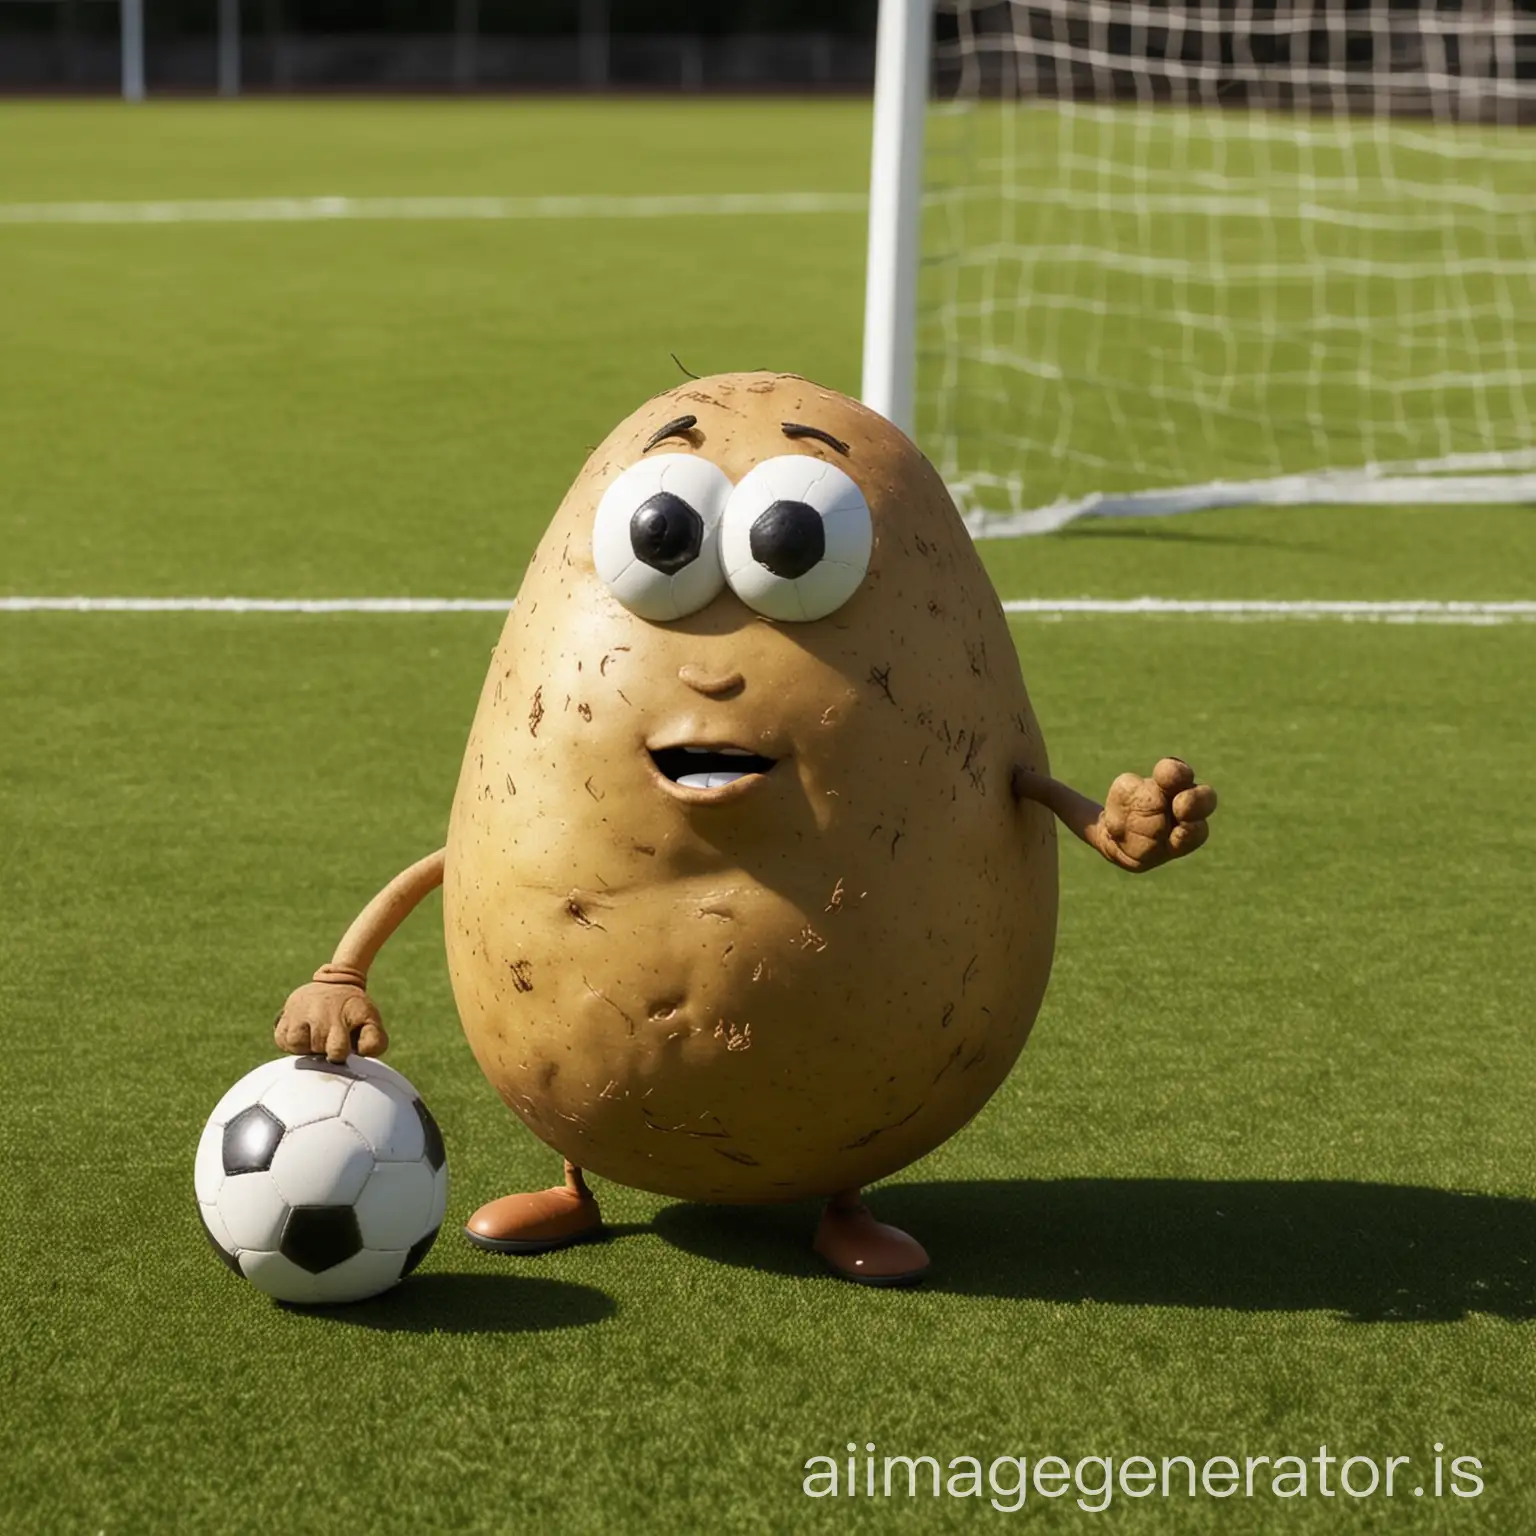 Toby-the-Potato-Scores-a-Goal-on-the-Soccer-Pitch